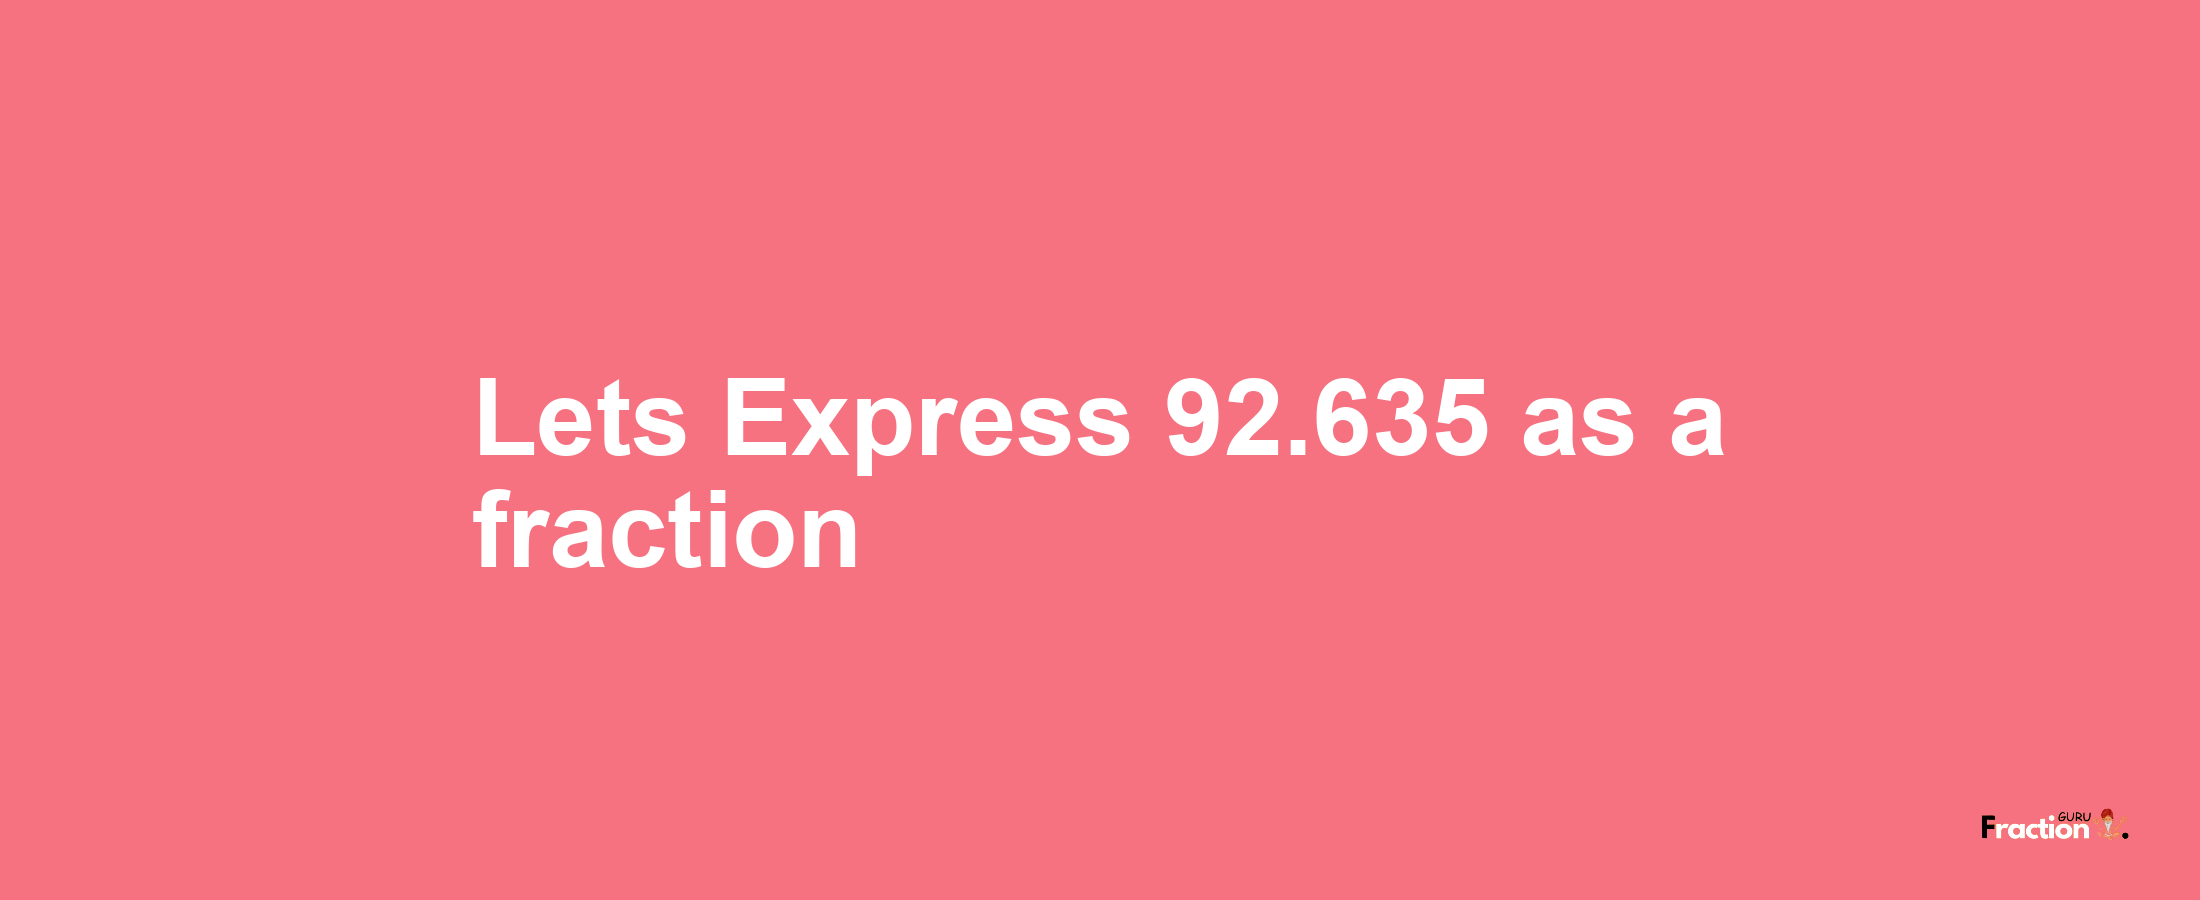 Lets Express 92.635 as afraction